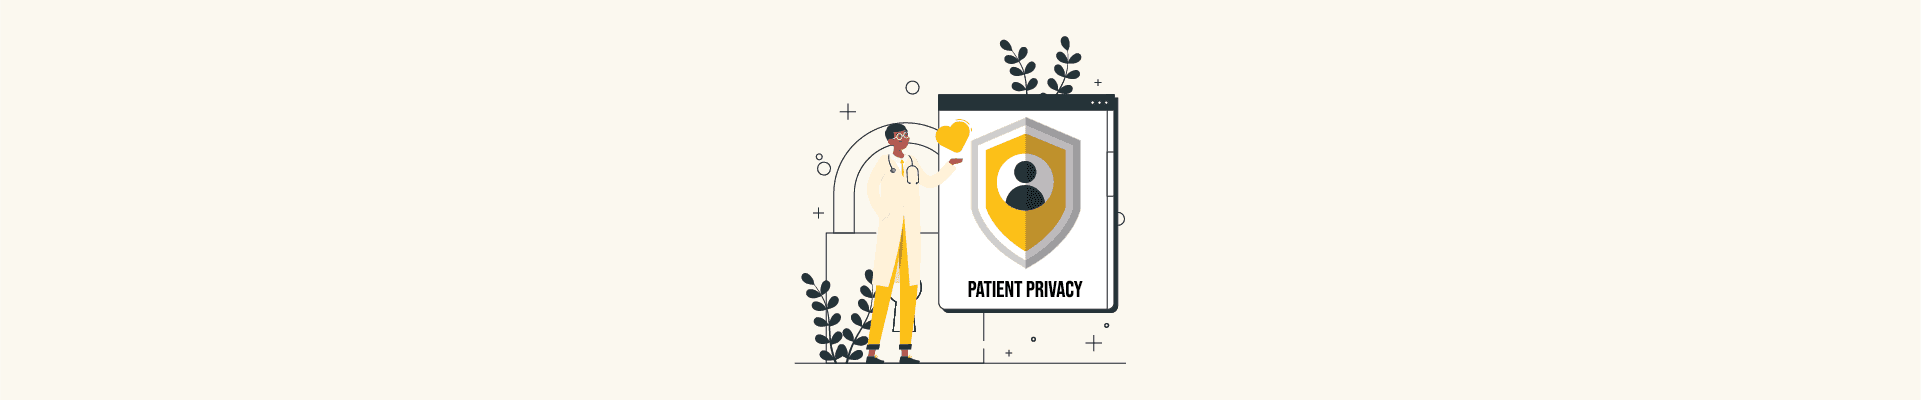 5 EHRs with Foolproof Patient Privacy Features